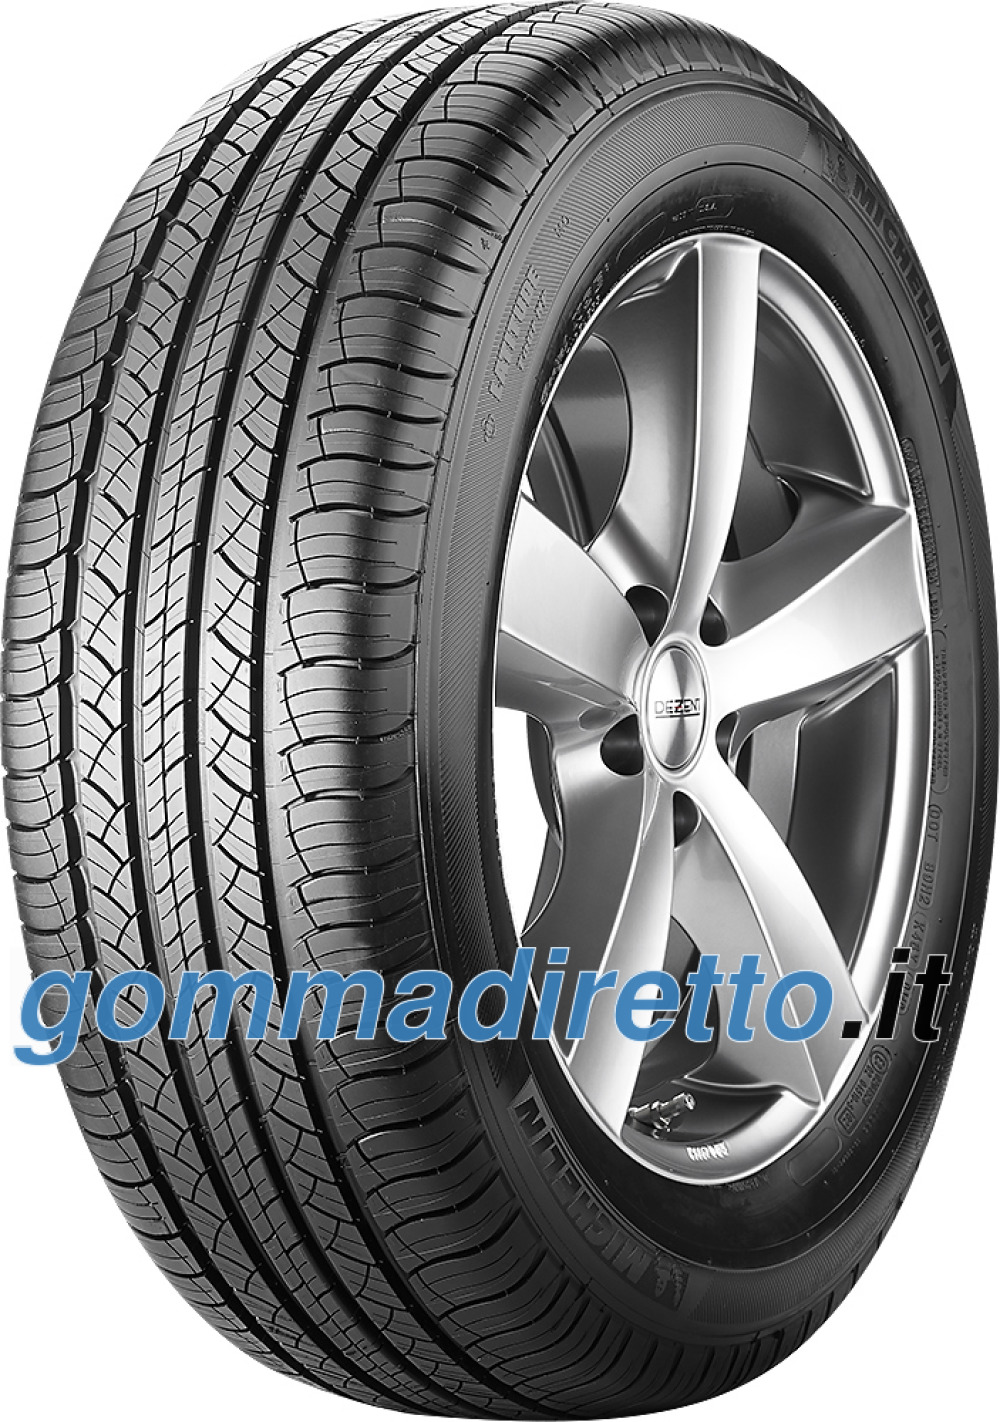 Image of Michelin Latitude Tour HP ( 255/55 R18 109V XL, N2 )